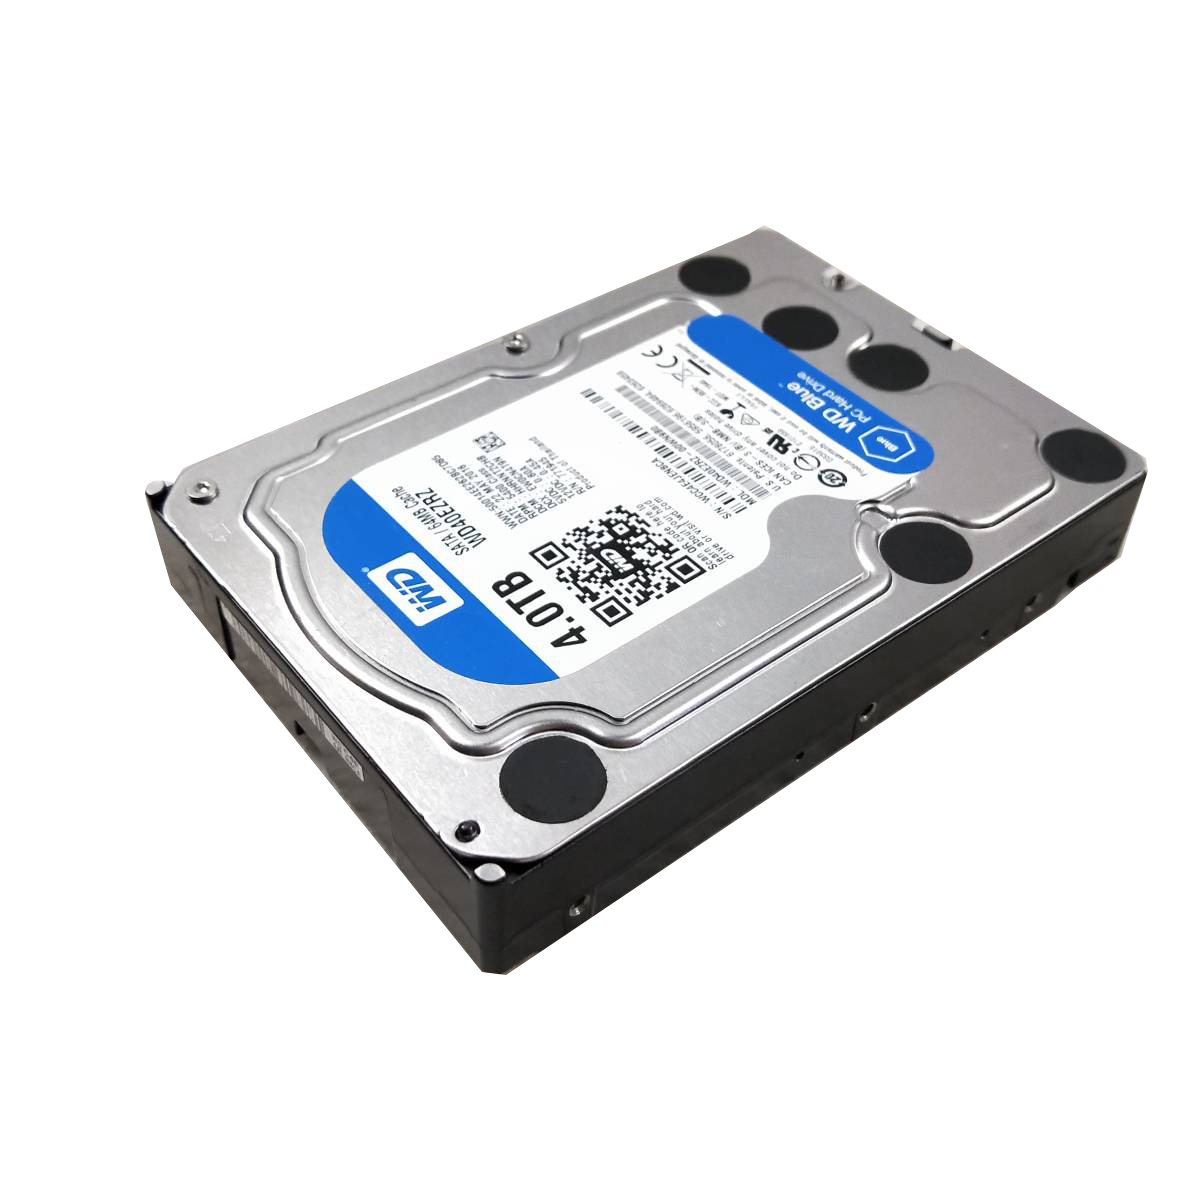 パーツ】3.5 SATA 4TB 1台 正常 WD WD40EZRZ 使用時間0H □HDD1536-